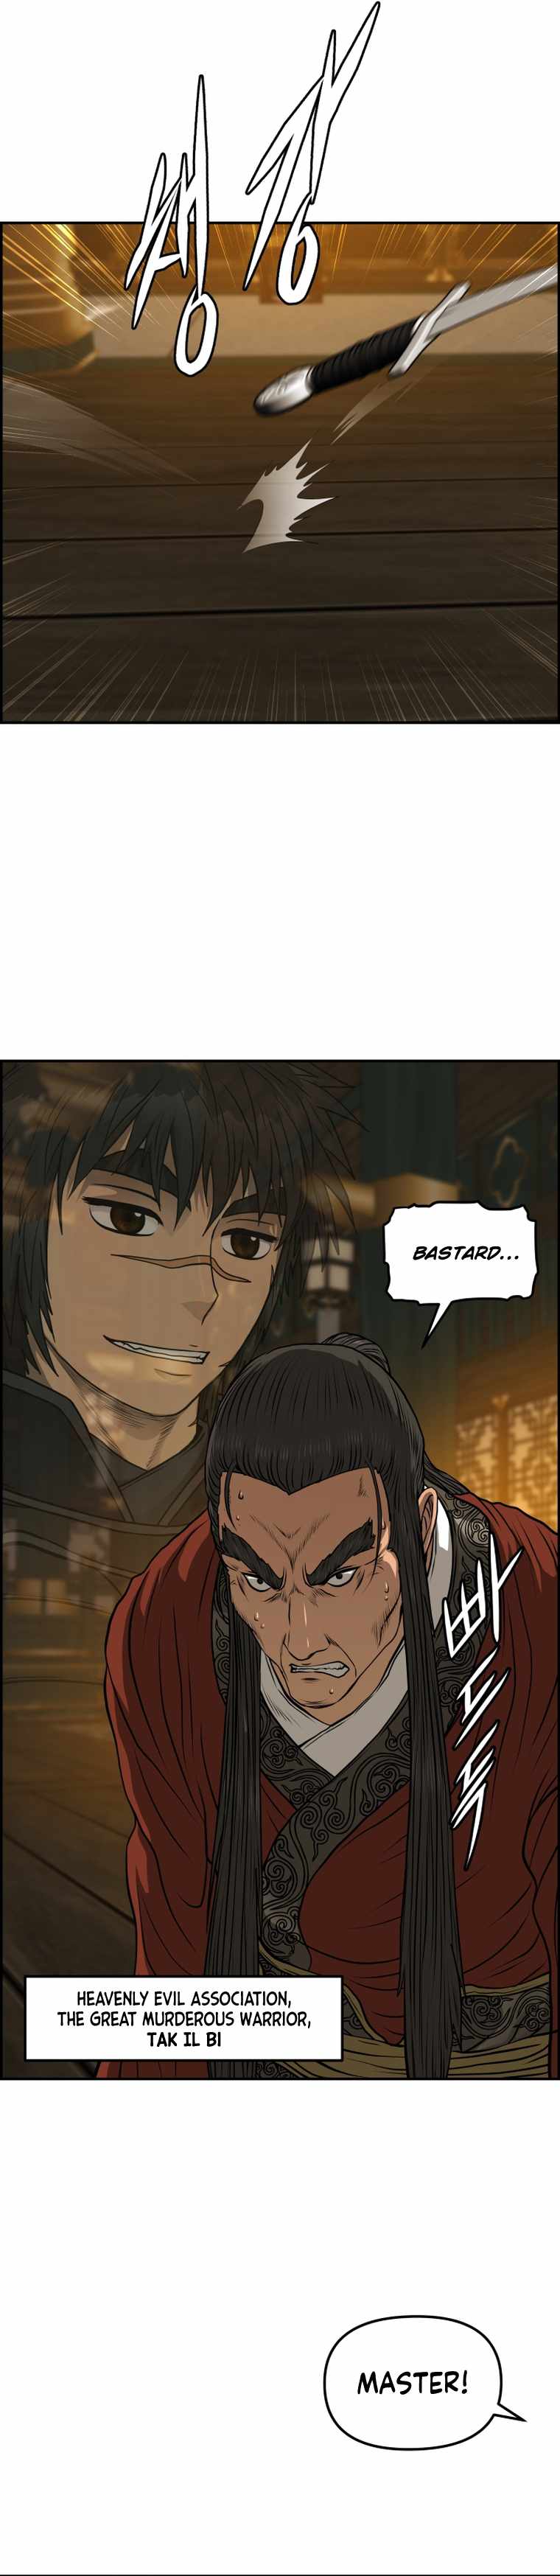 Blade Of Wind And Thunder Chapter 88-eng-li - Page 10